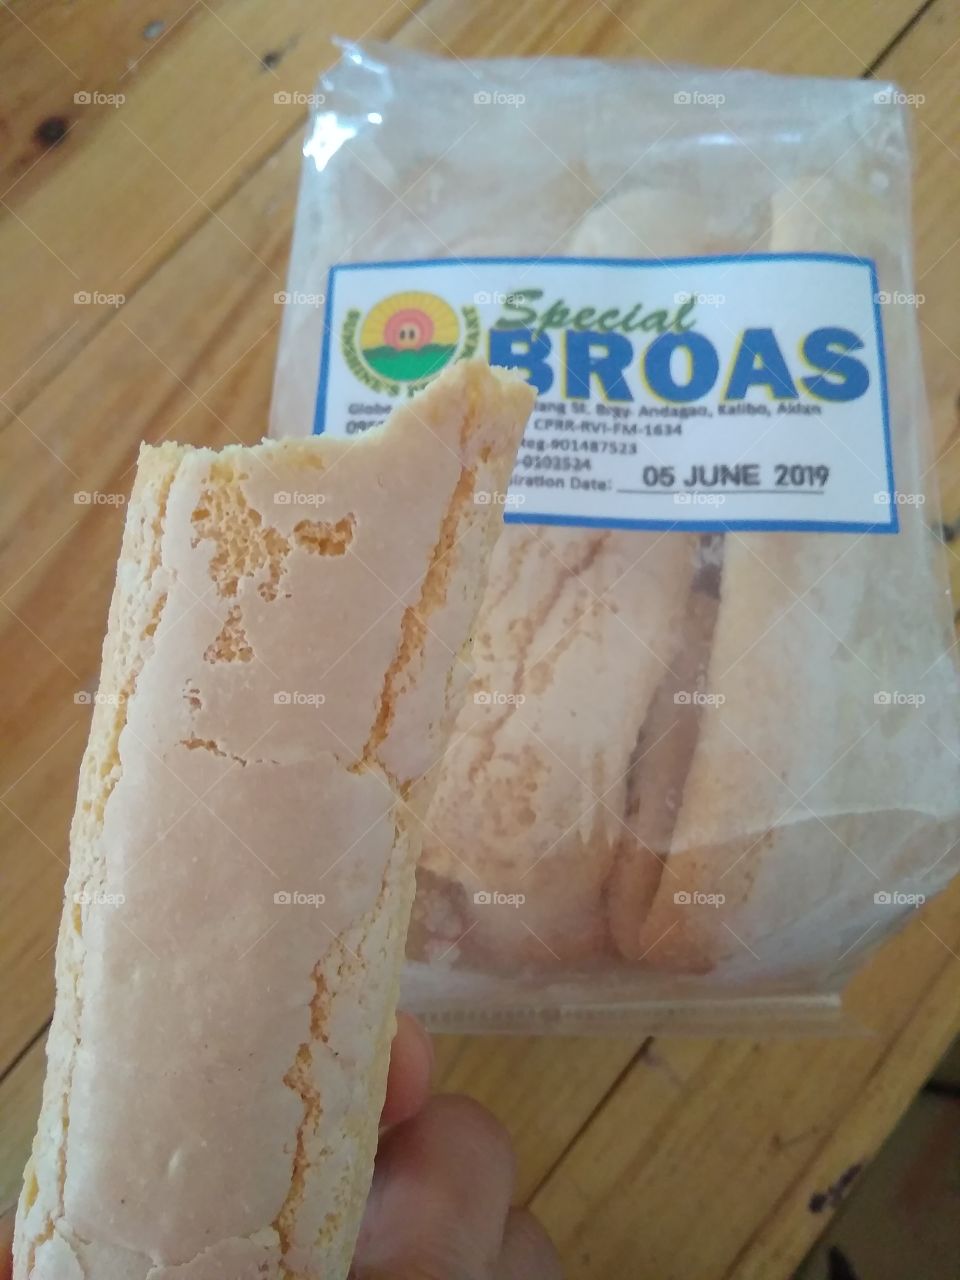 Delicacy or snack. Broas is sweet and it is something that will melts in your mouth. It's soft like marshmallow but it's not bouncy. It's. brittle. It's yummy